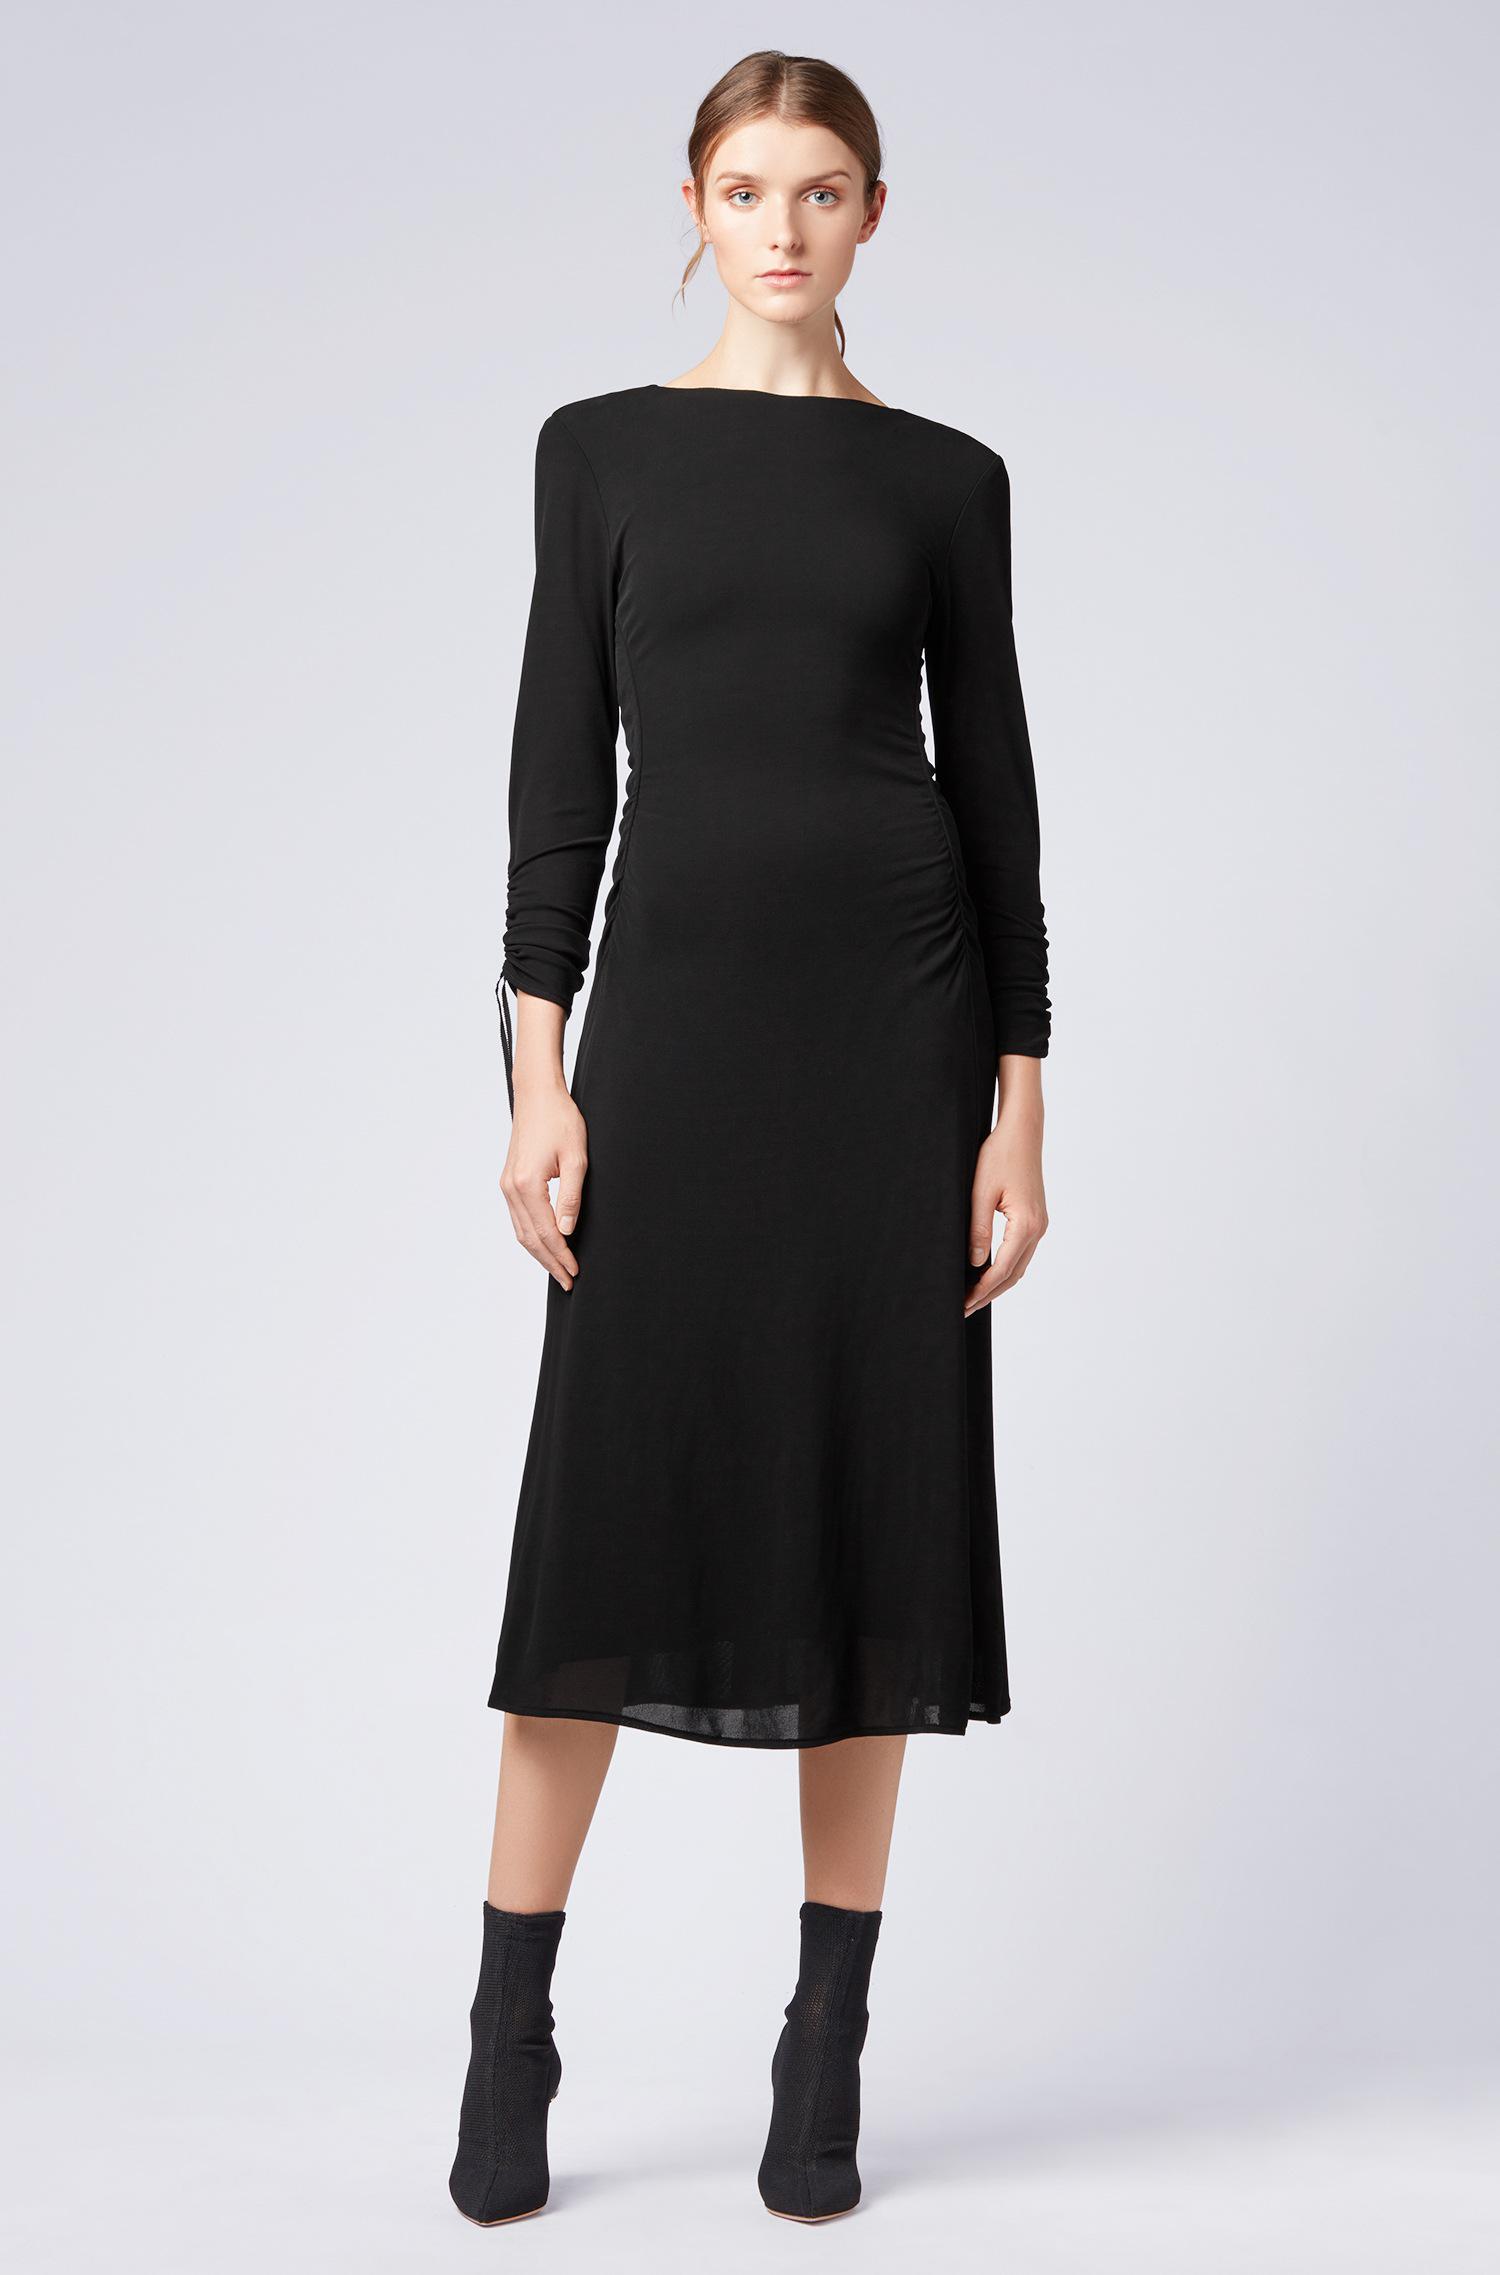 BOSS by Hugo Boss Synthetic Longlength Mattejersey Dress With Gathered Sleeves in Black Lyst